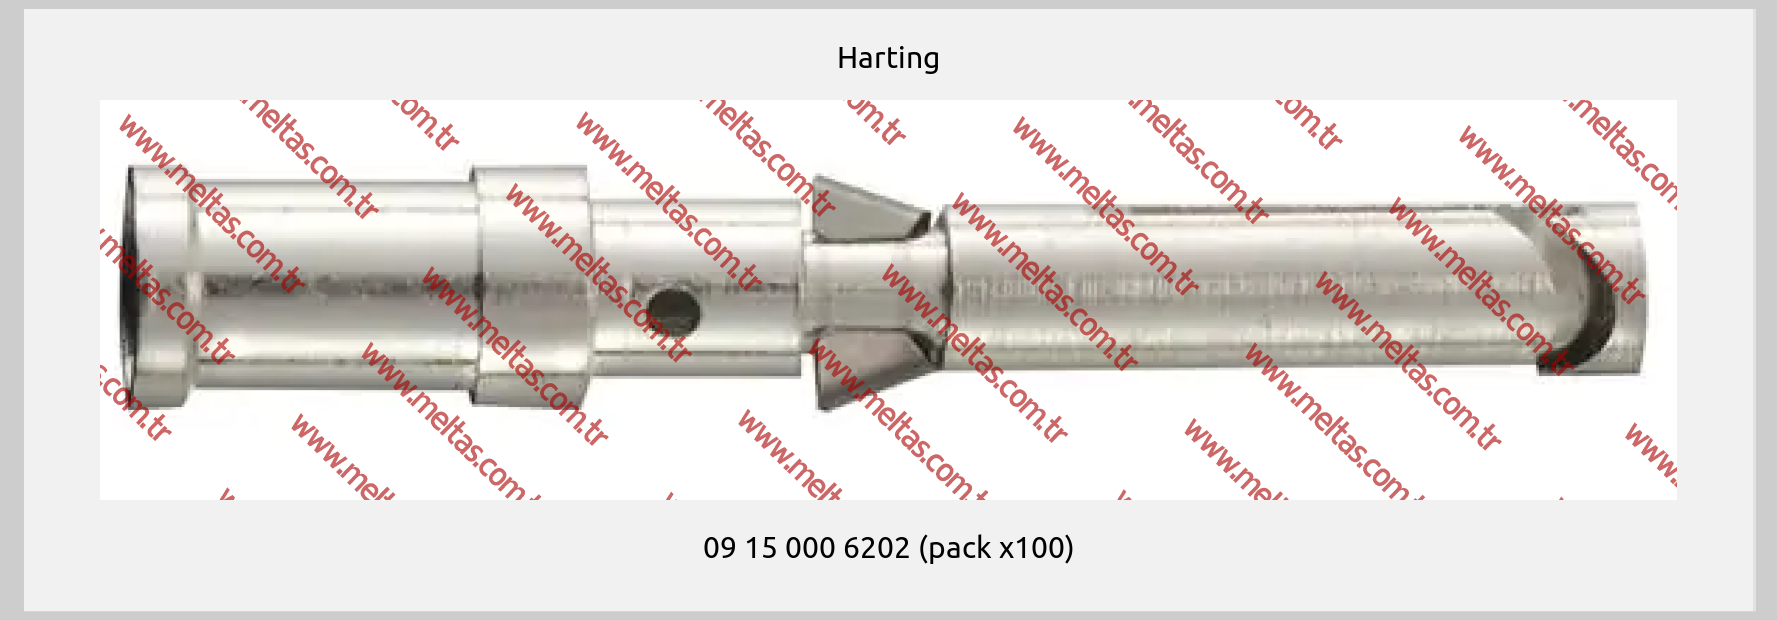 Harting-09 15 000 6202 (pack x100)